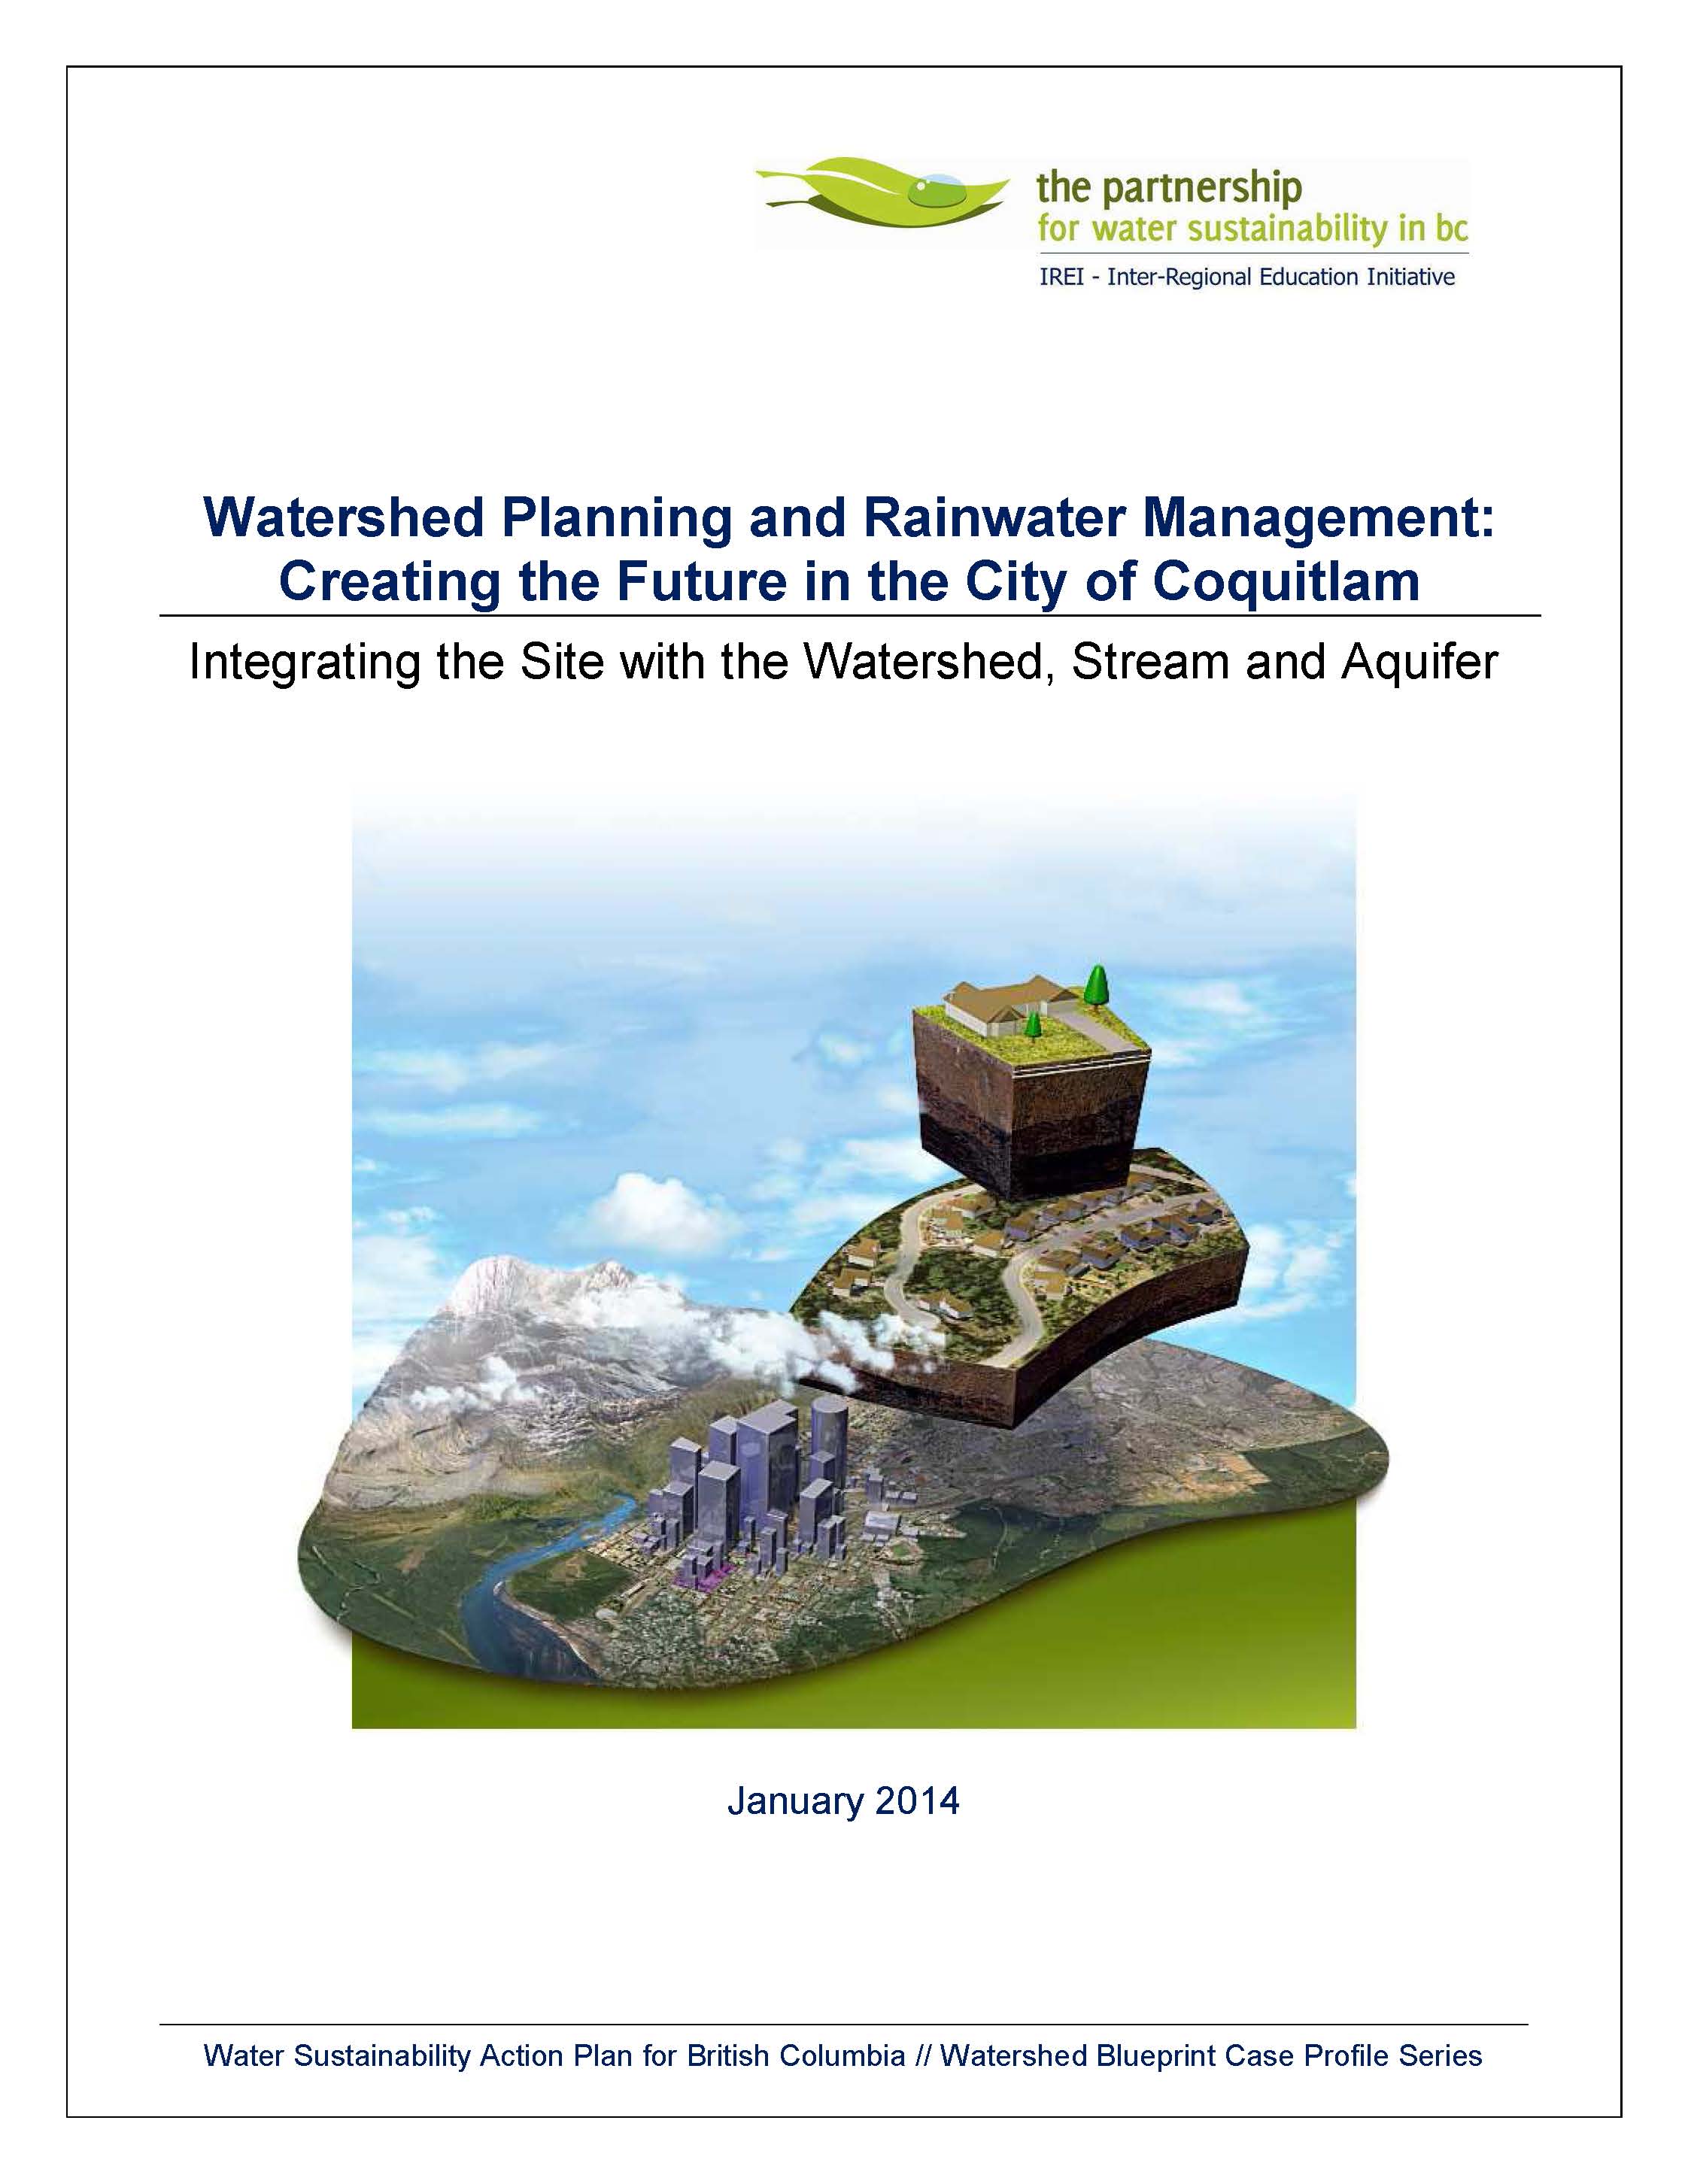 Coquitlam Watershed Planning and Rainwater Management Article (Jan 2014)_cover